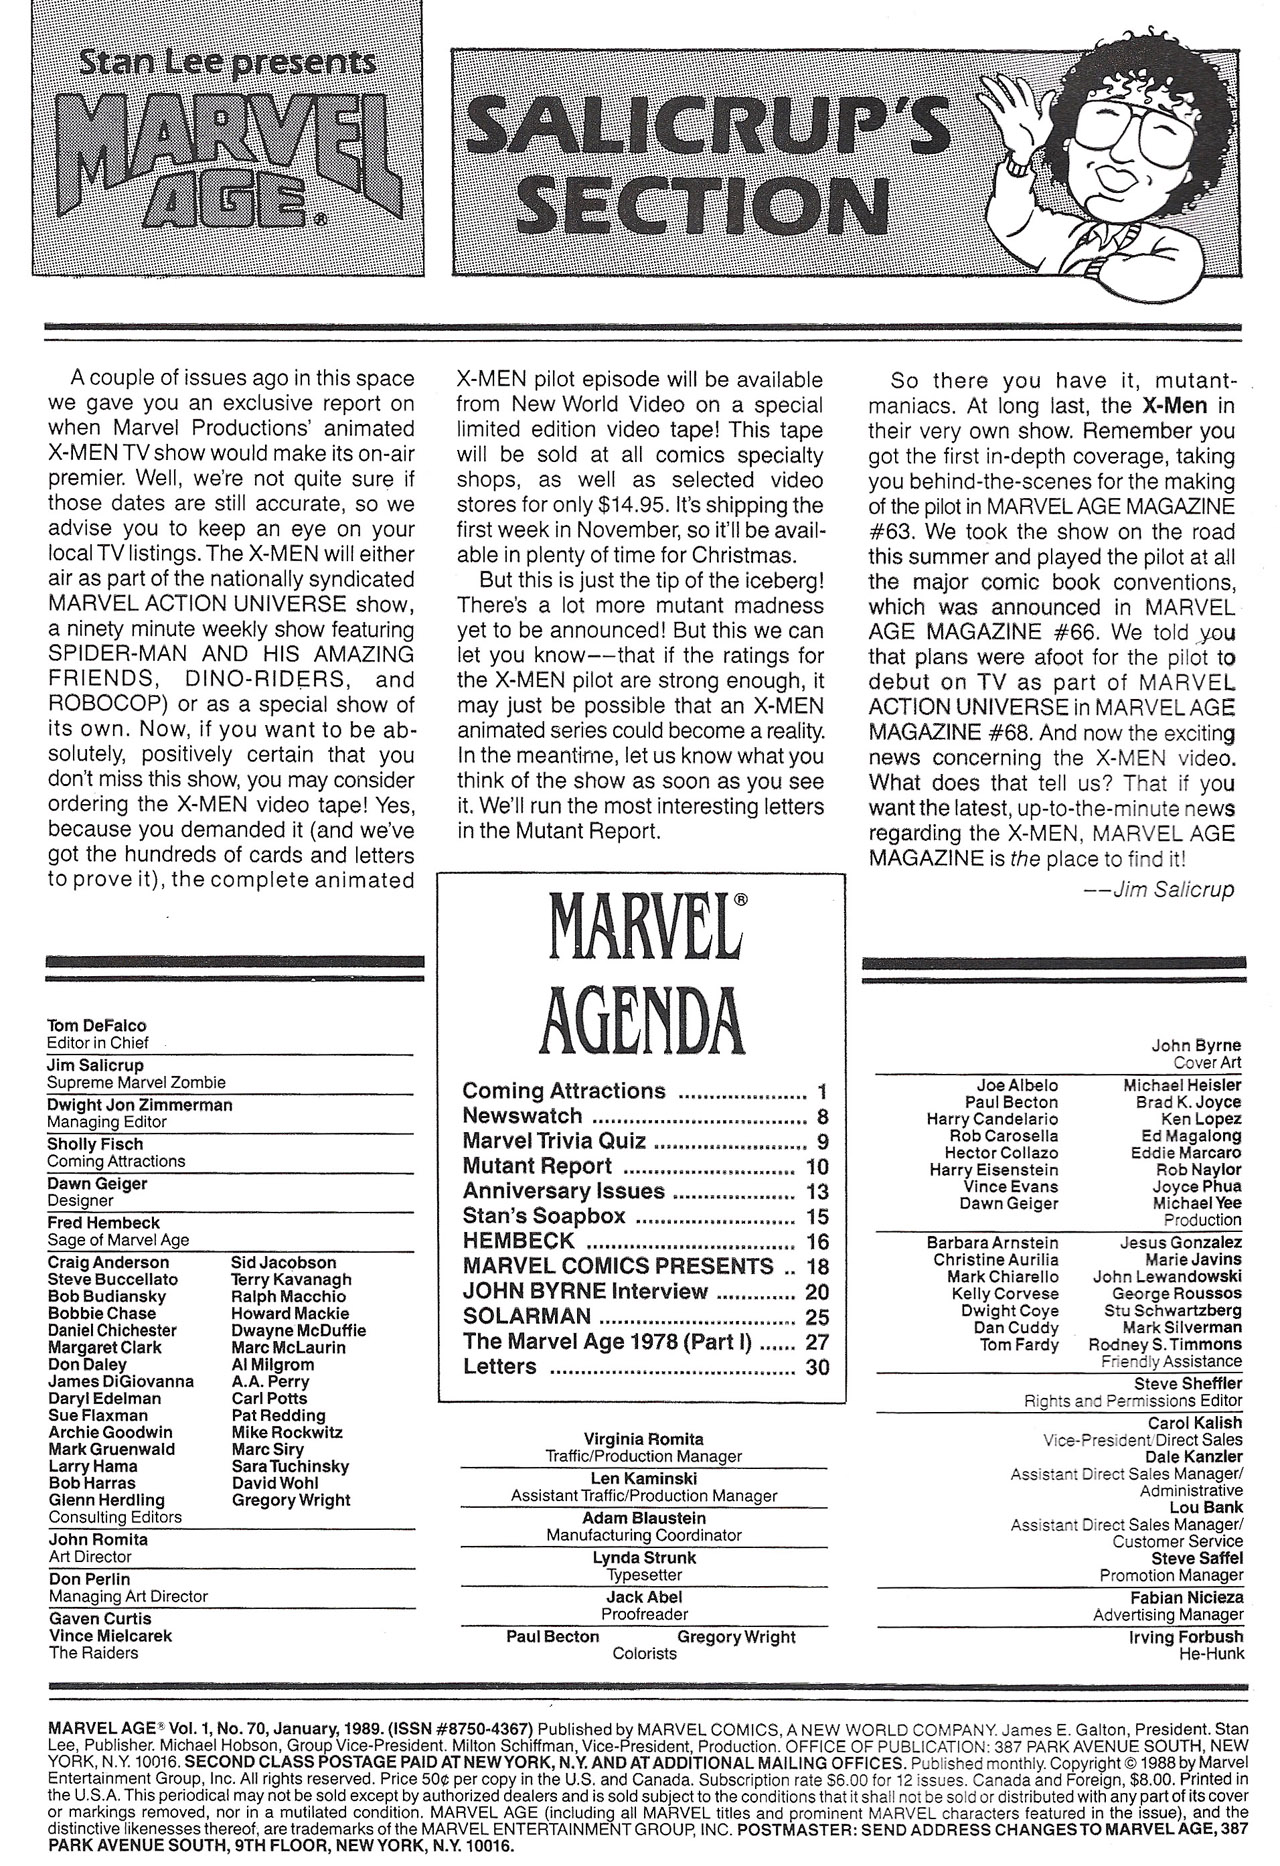 Read online Marvel Age comic -  Issue #70 - 2